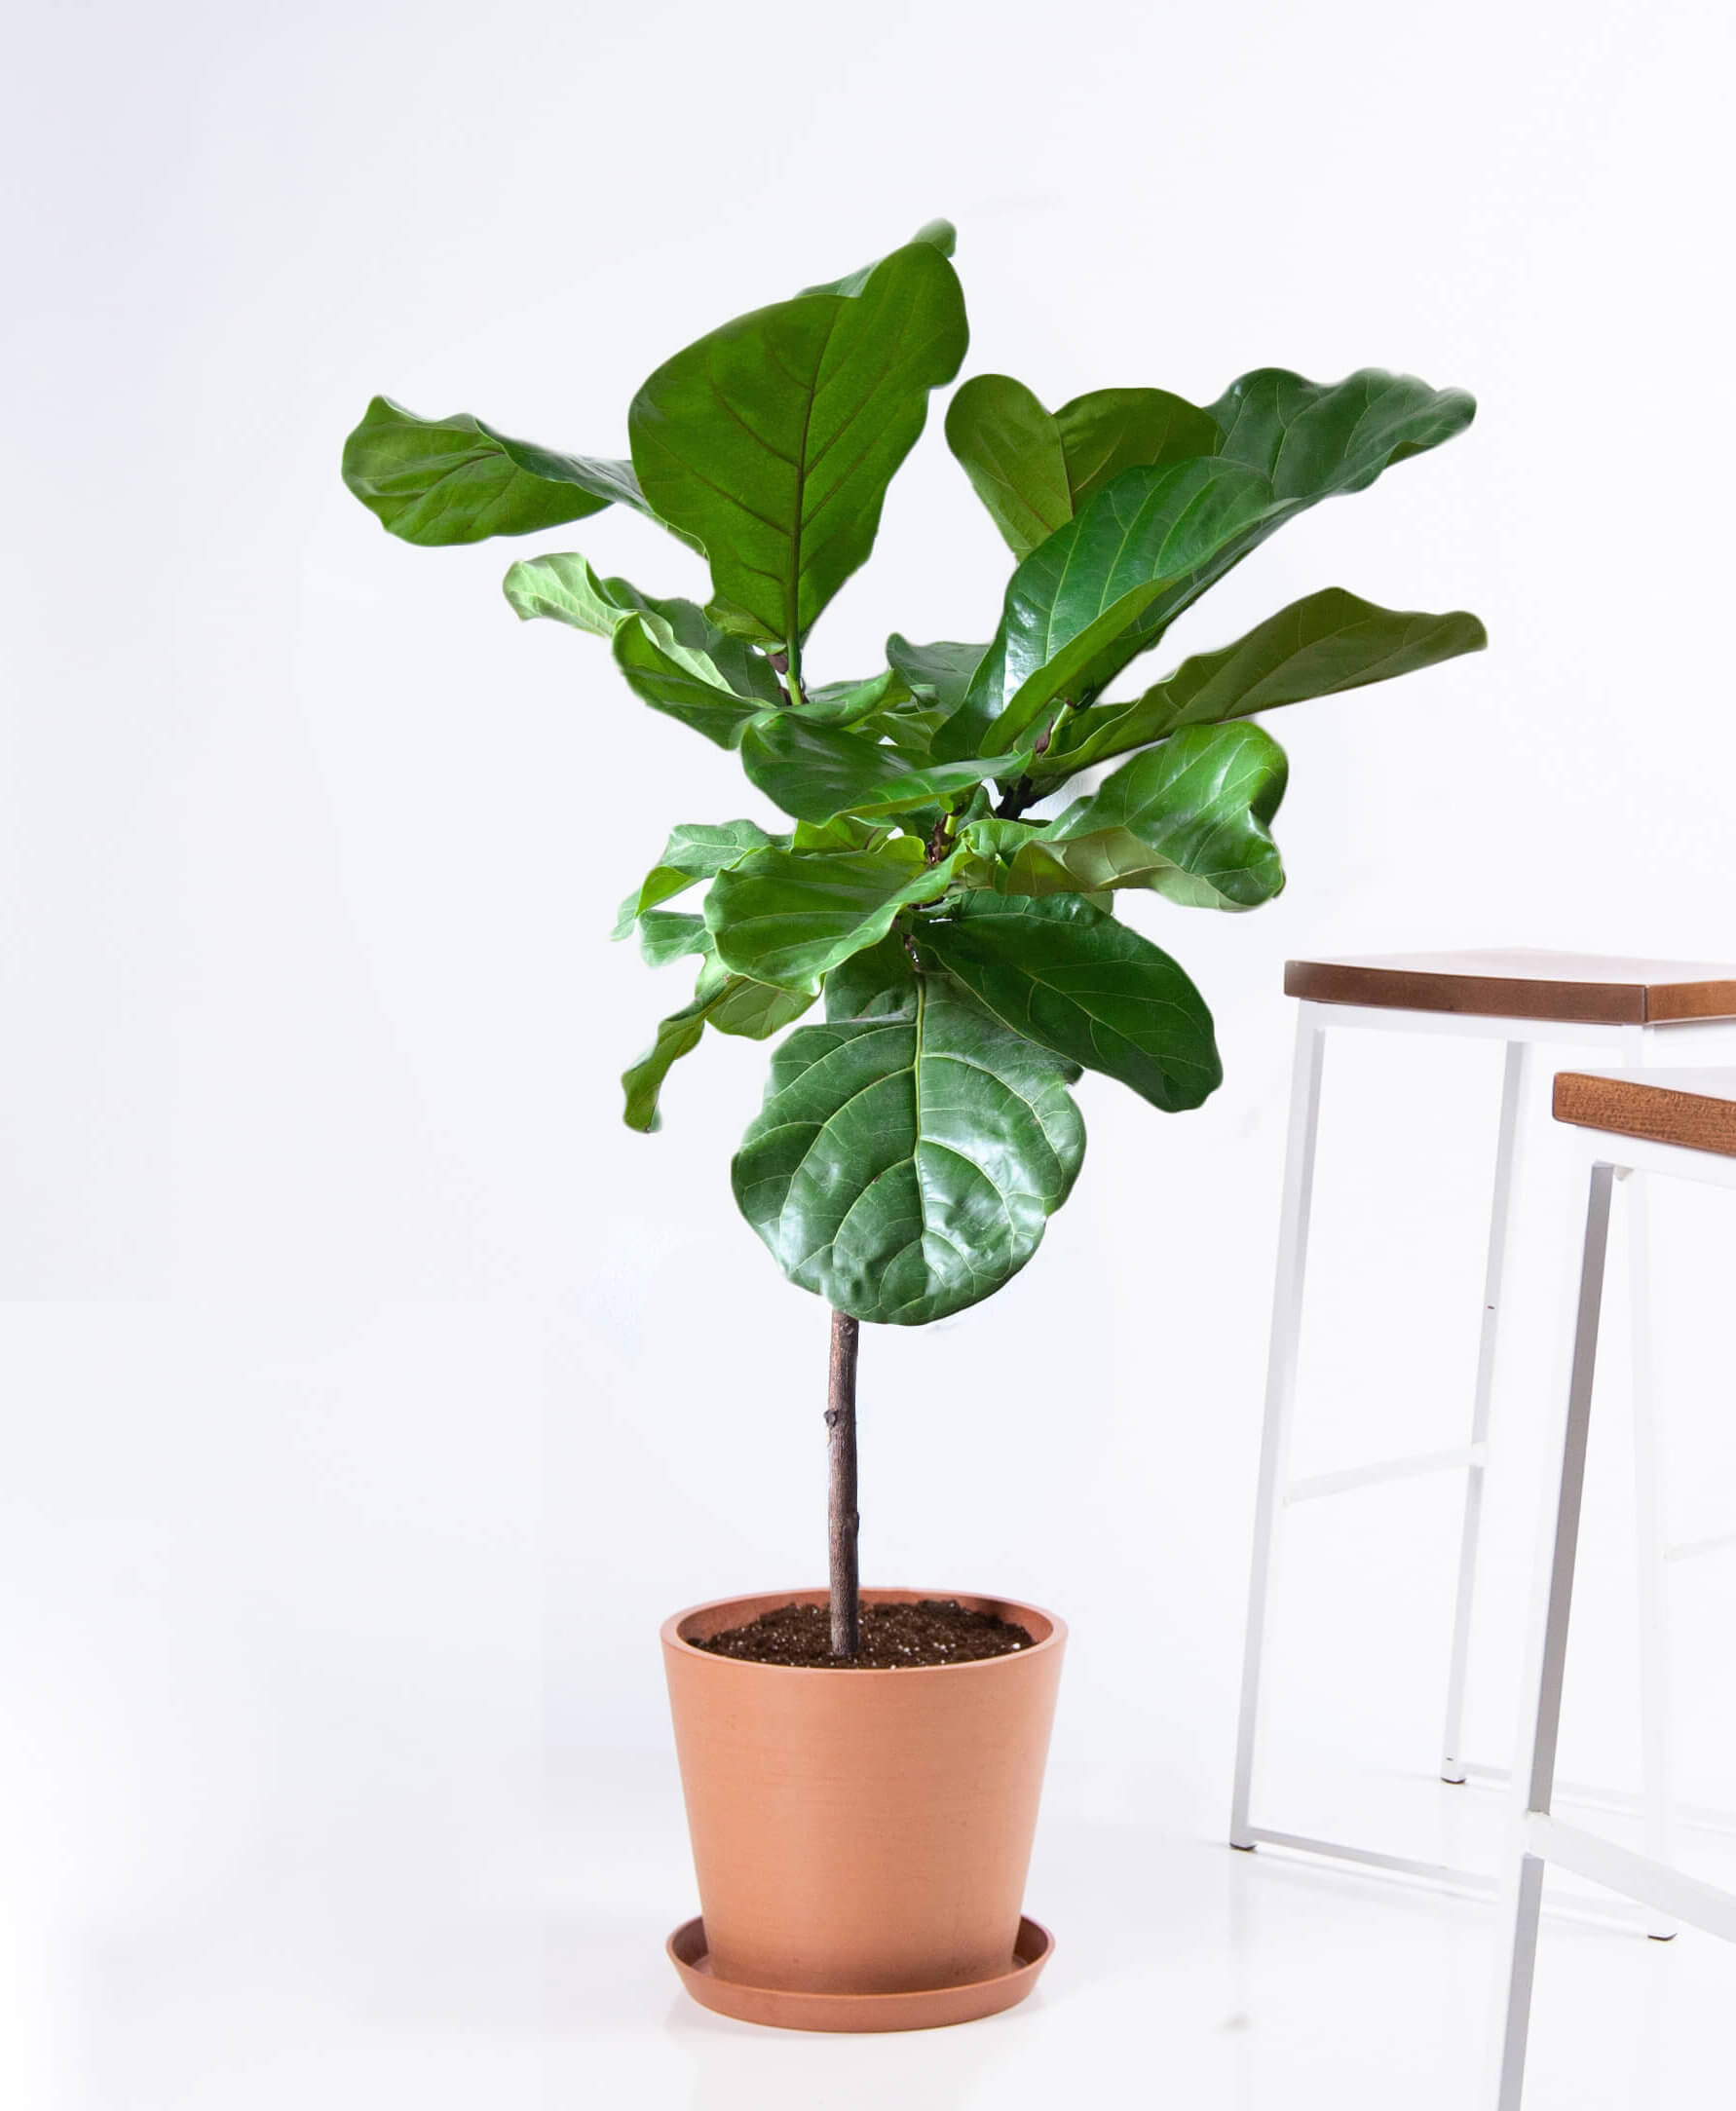 bloomscape_product-fiddle-leaf-fig-clay-2-e1558203179180